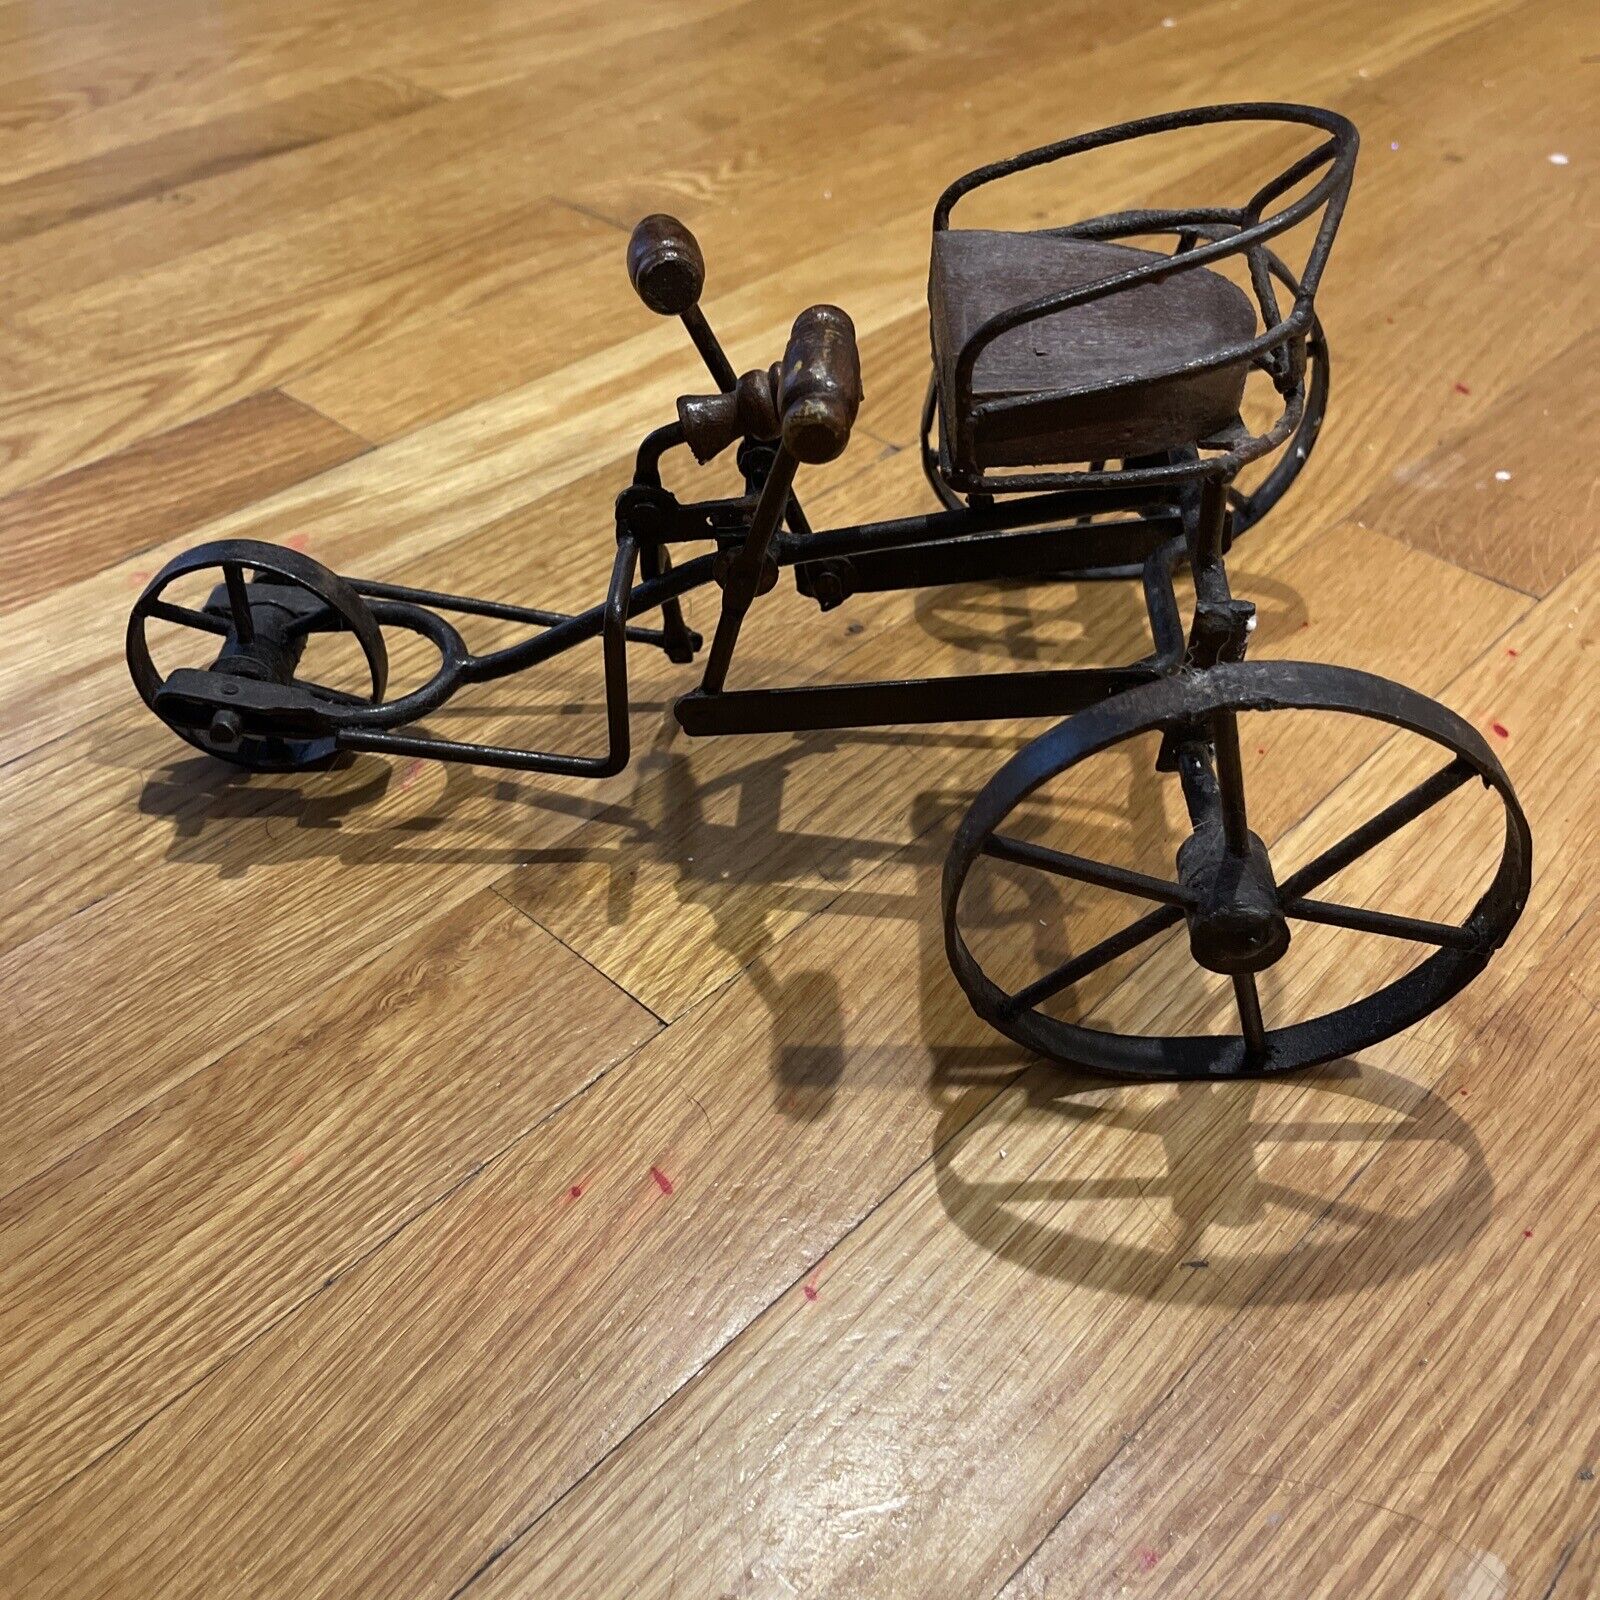 Rare Vintage Metal & Wood Tricycle Bicycle Home Decor, Working Moving Parts